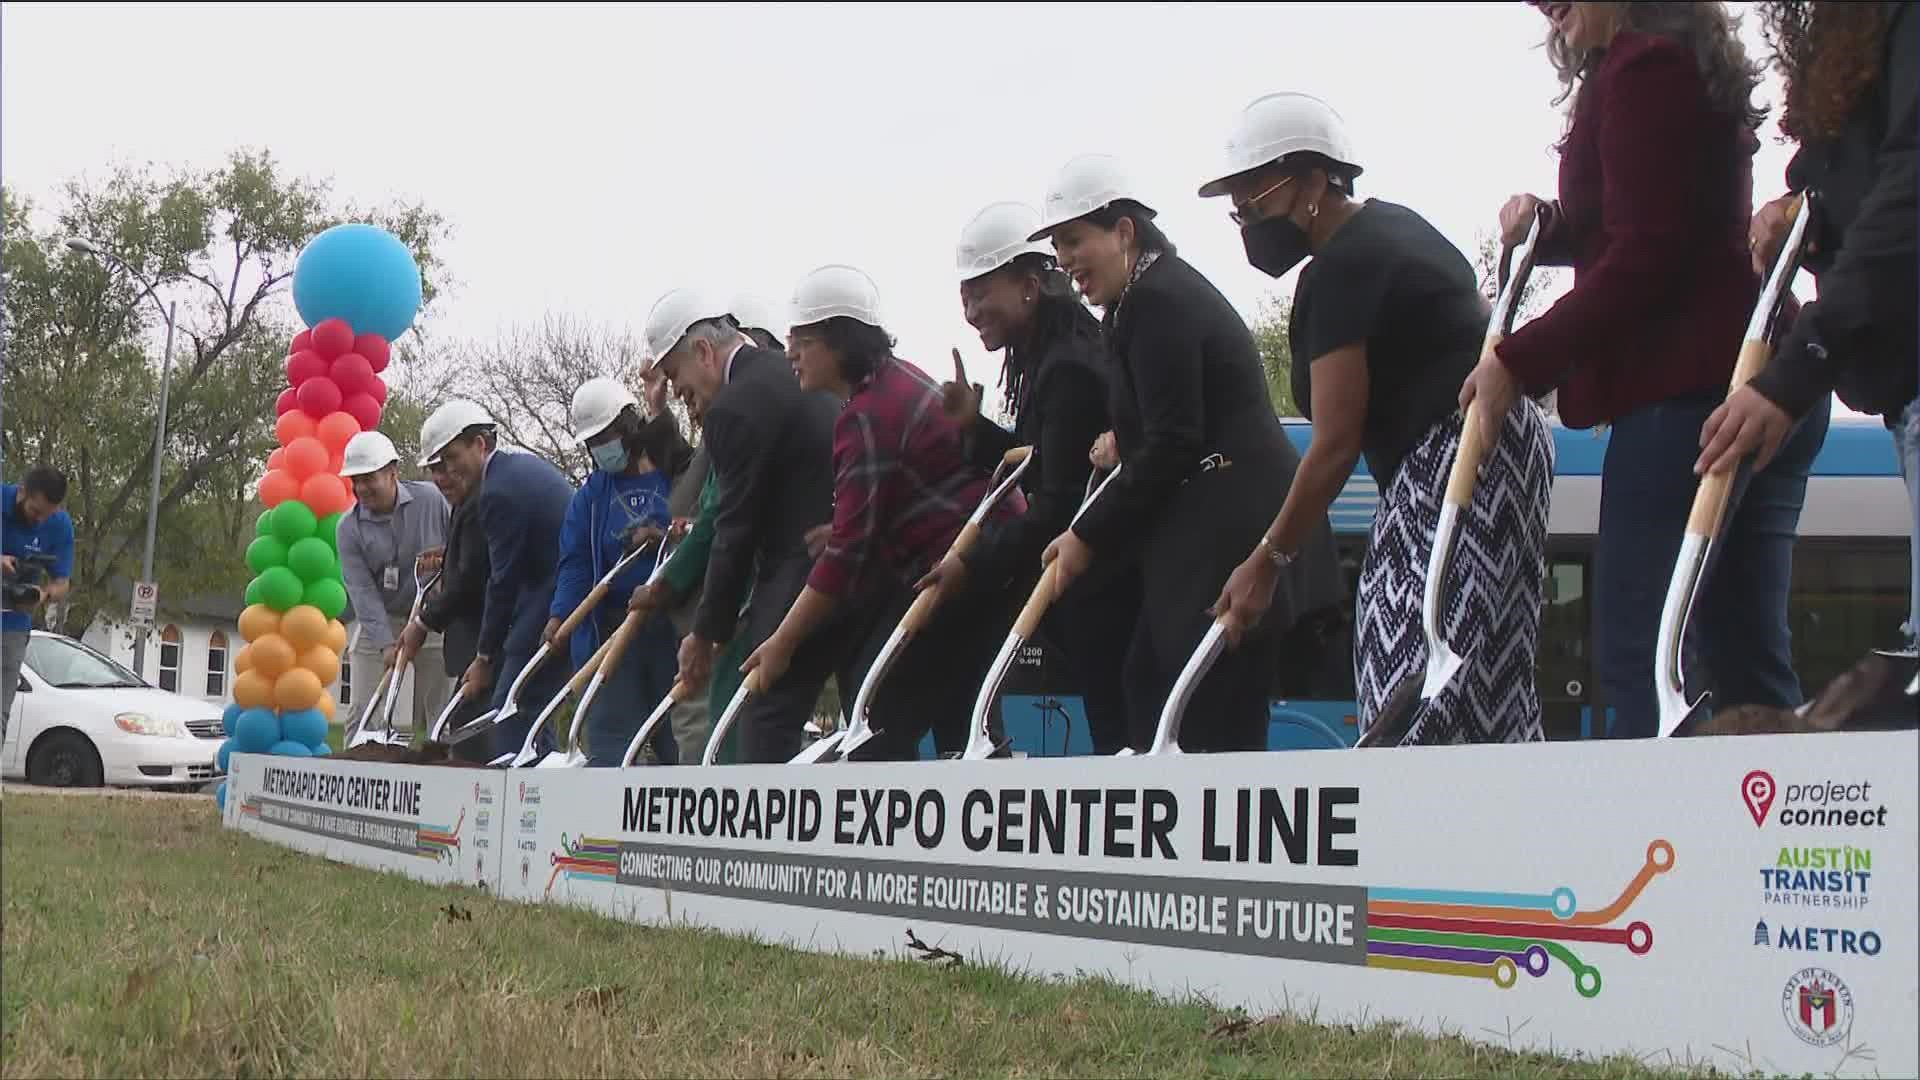 CapMetro broke ground on a new MetroRapid line that will connect East Austin to different parts of town. It's part of Project Connect, a $7 billion transit plan.